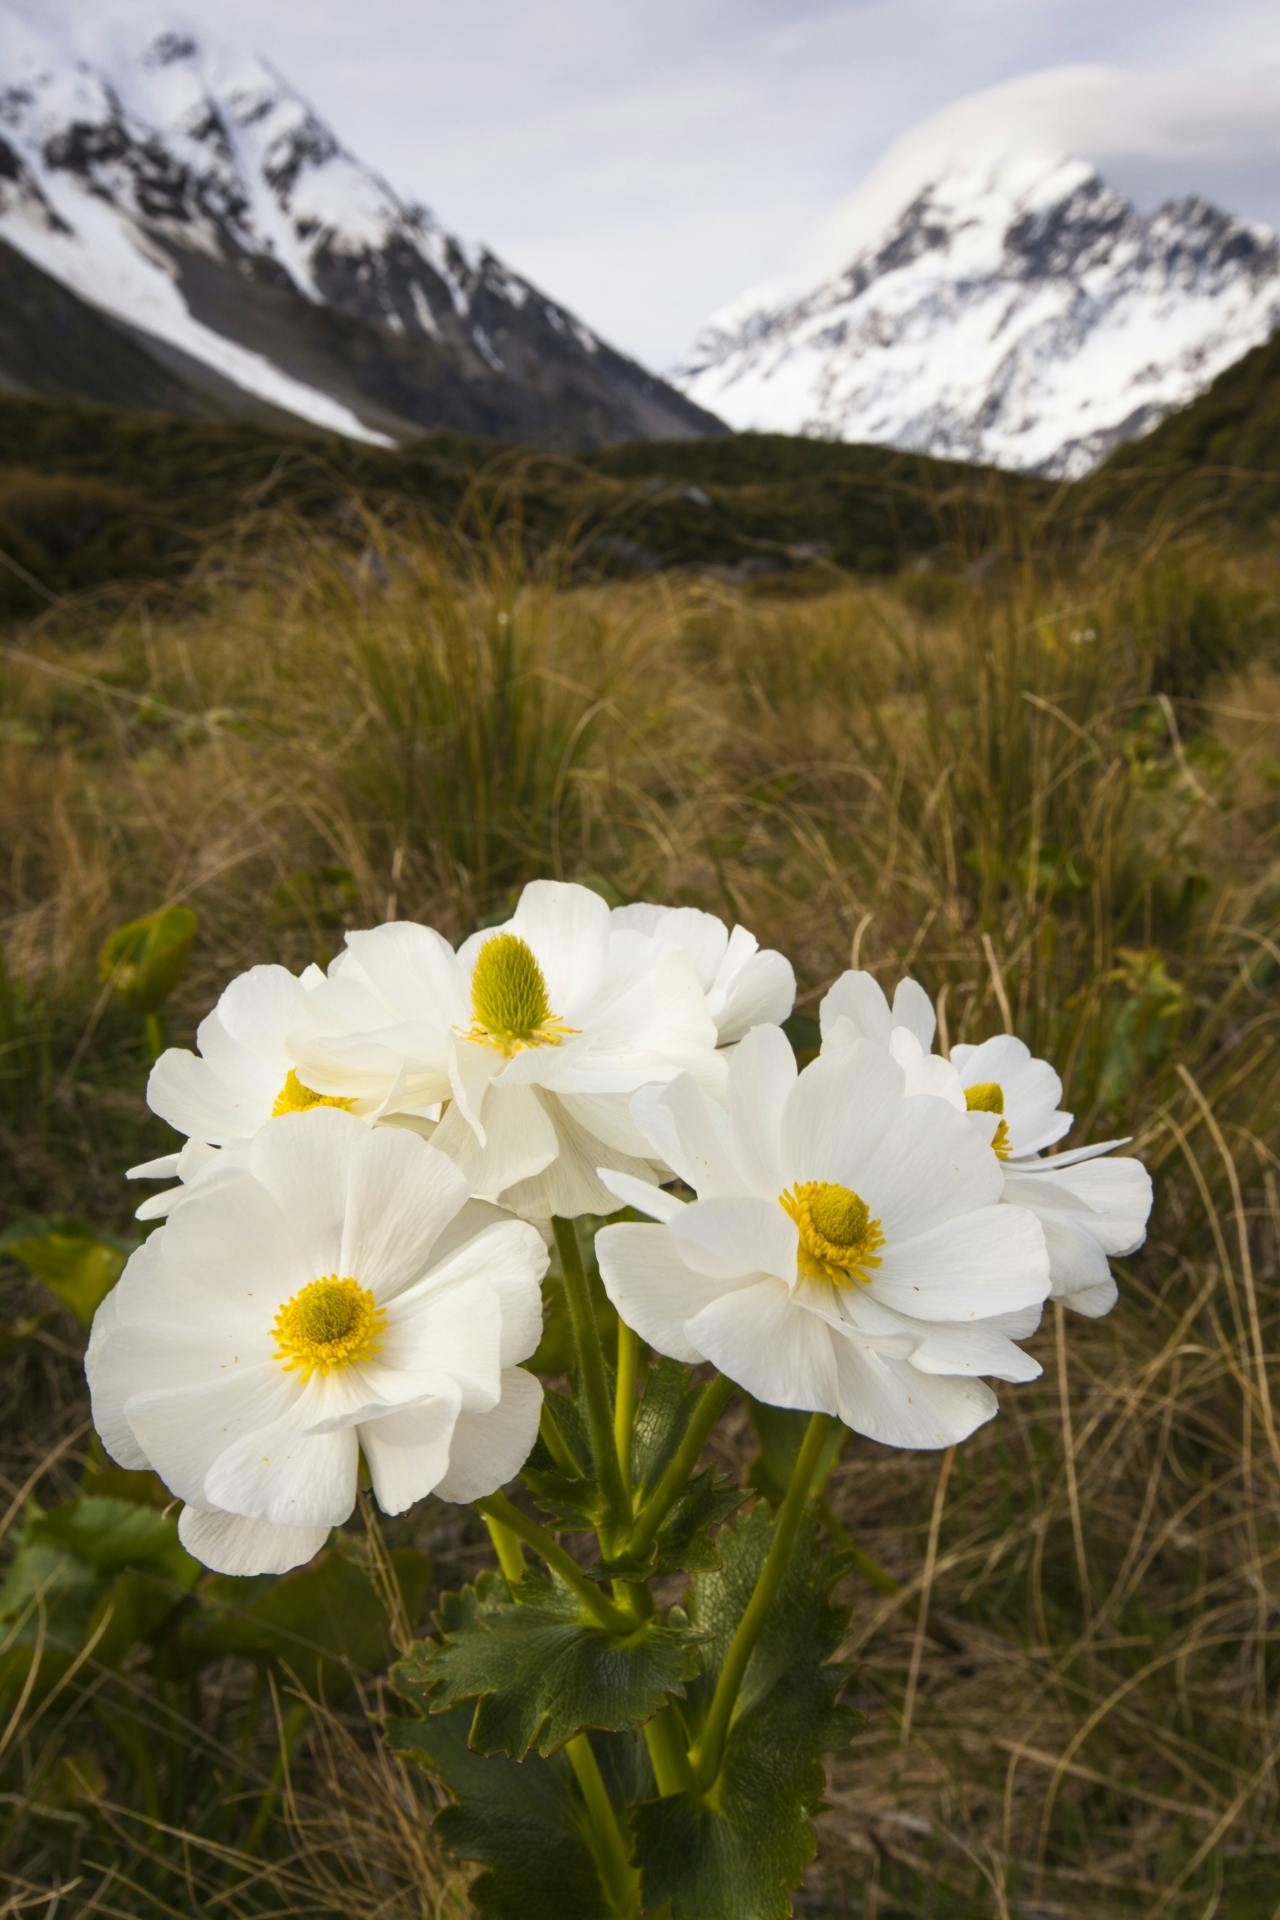 Mt Cook buttercup flowering in the Hooker Valley